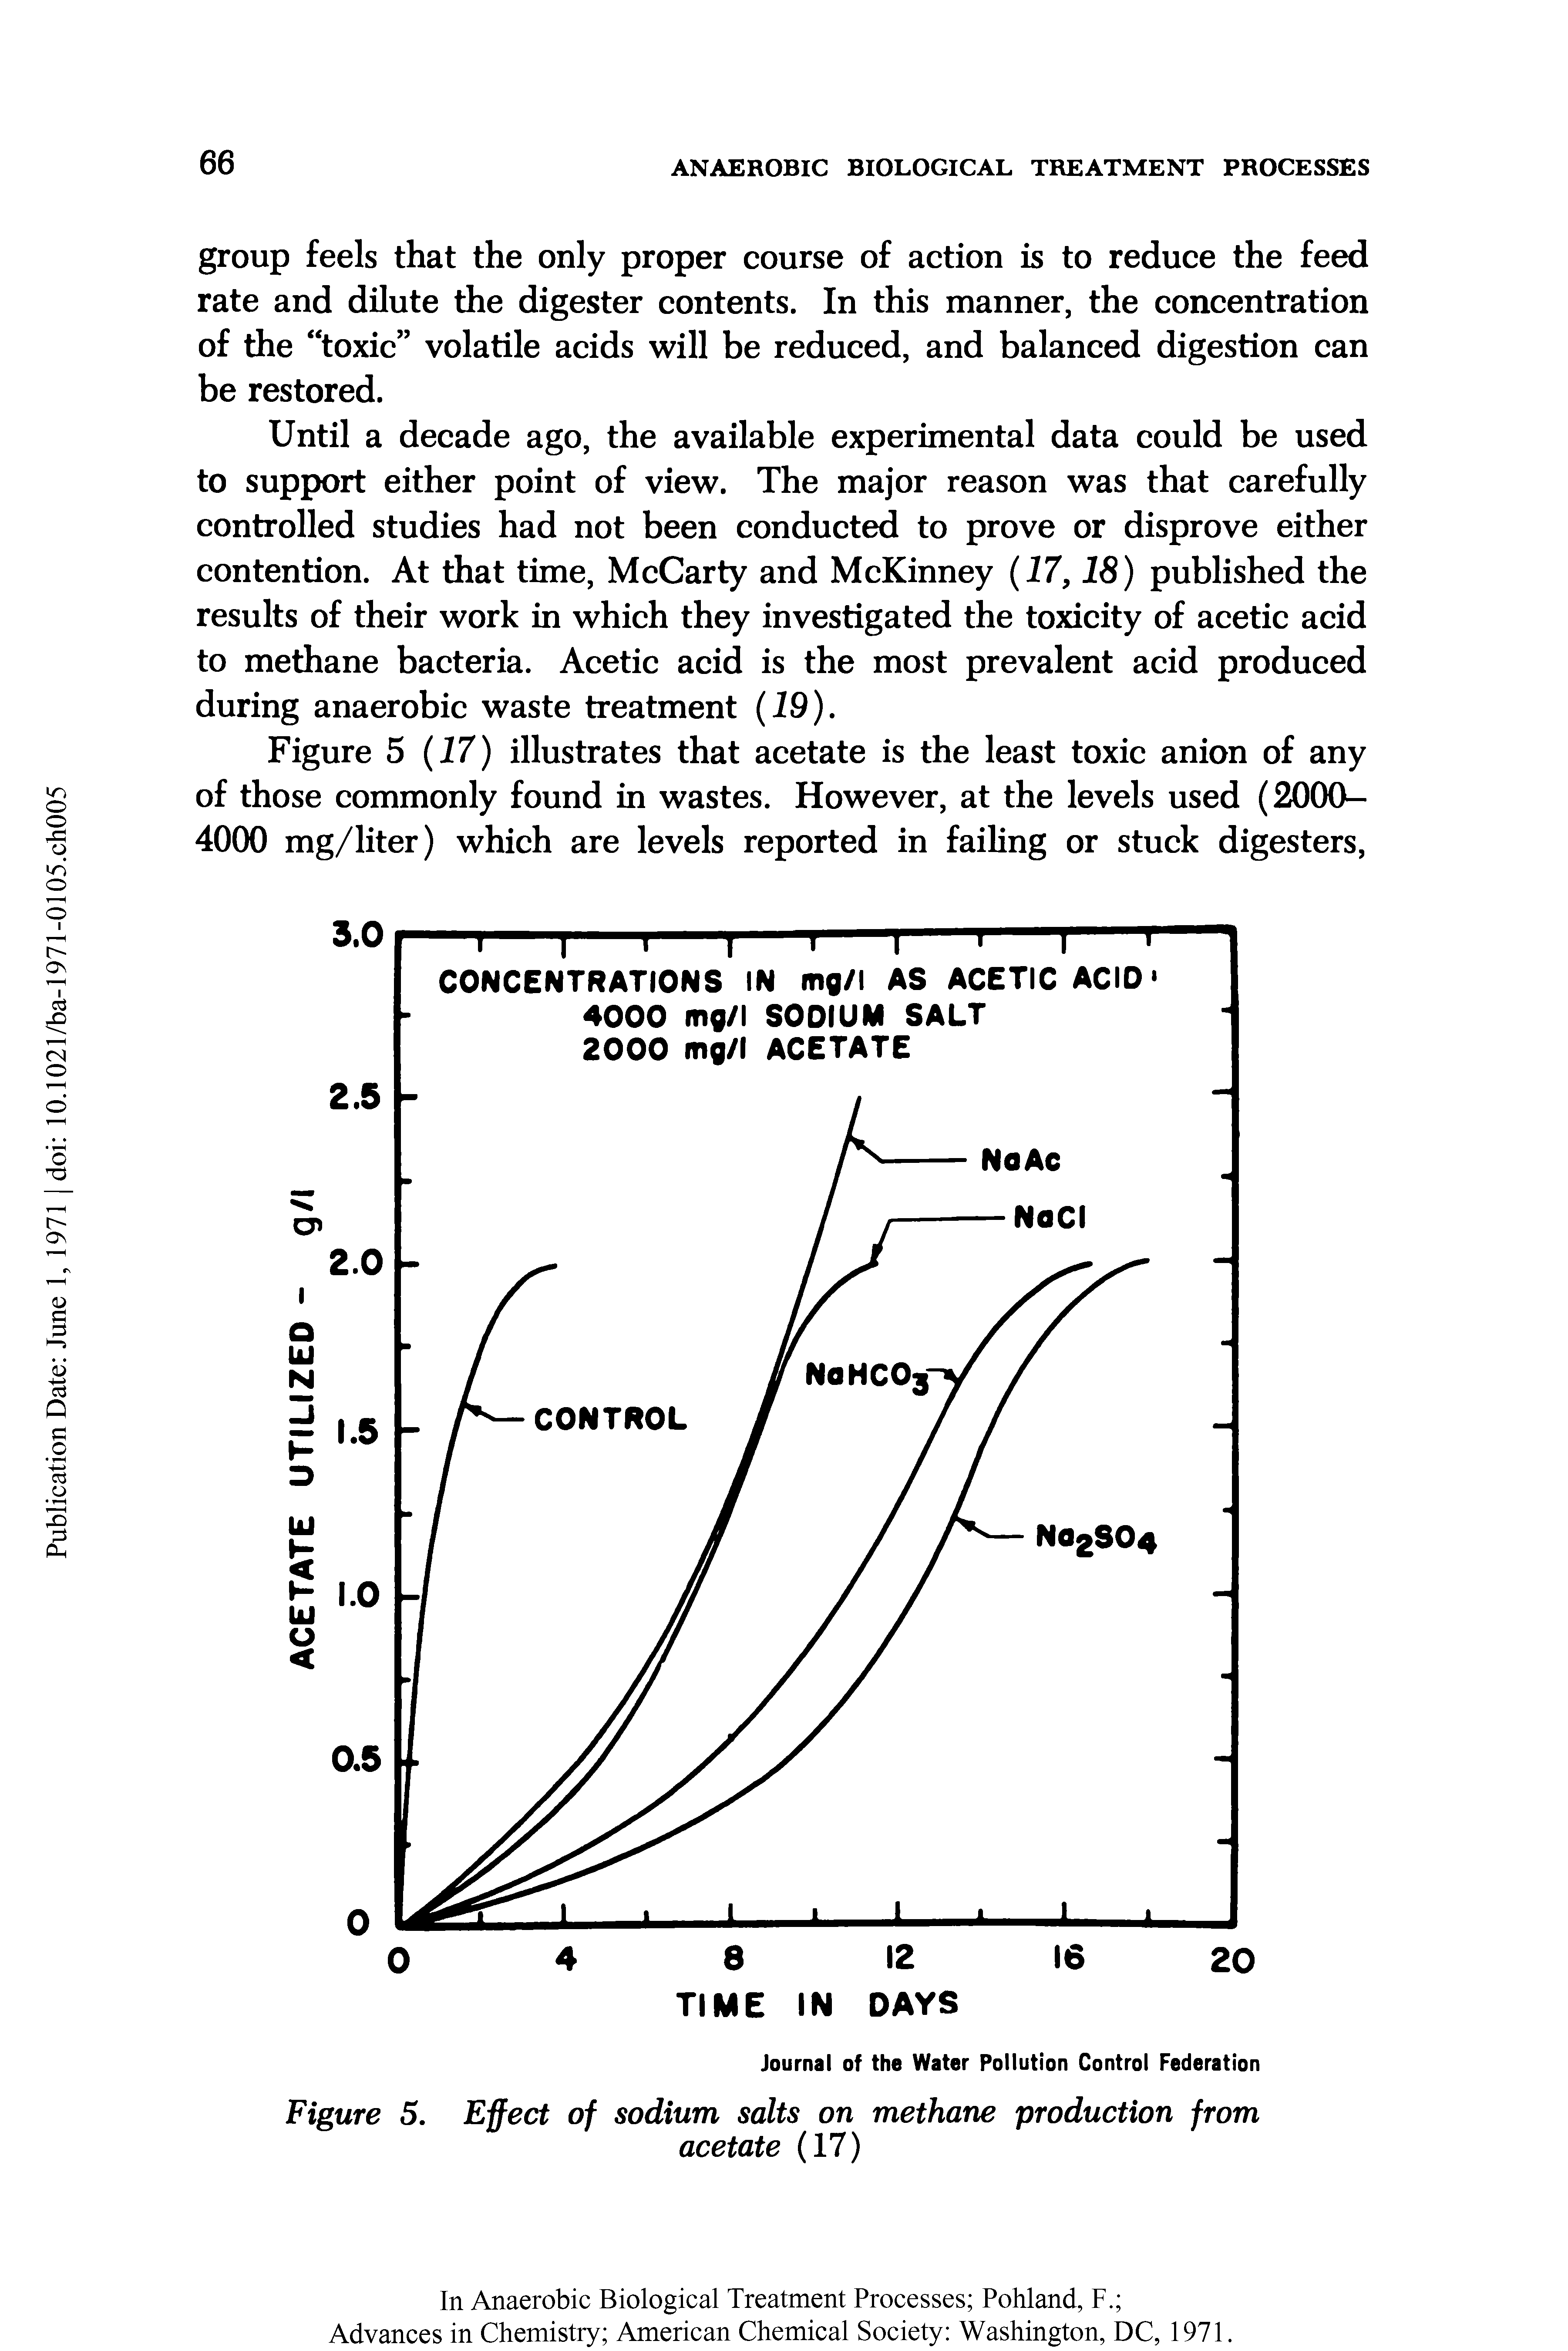 Figure 5. Effect of sodium salts on methane production from...